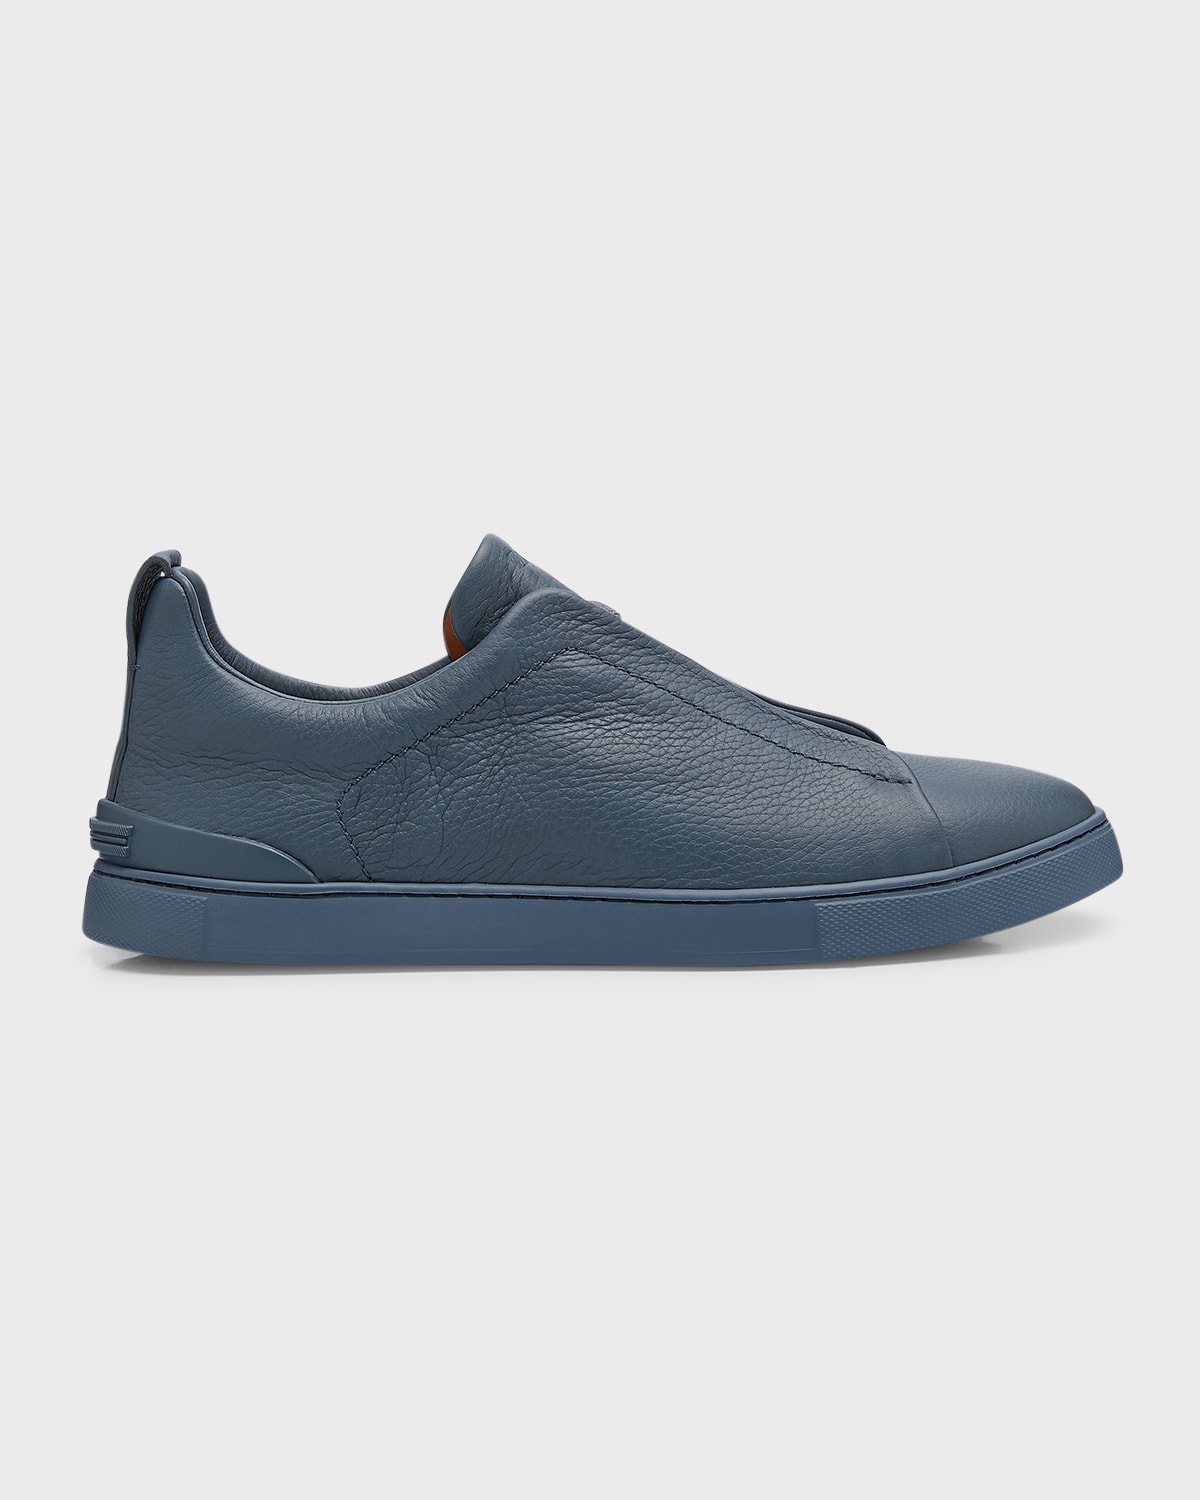 Men's Triple Stitch™ Slip-On Leather Low-Top Sneakers